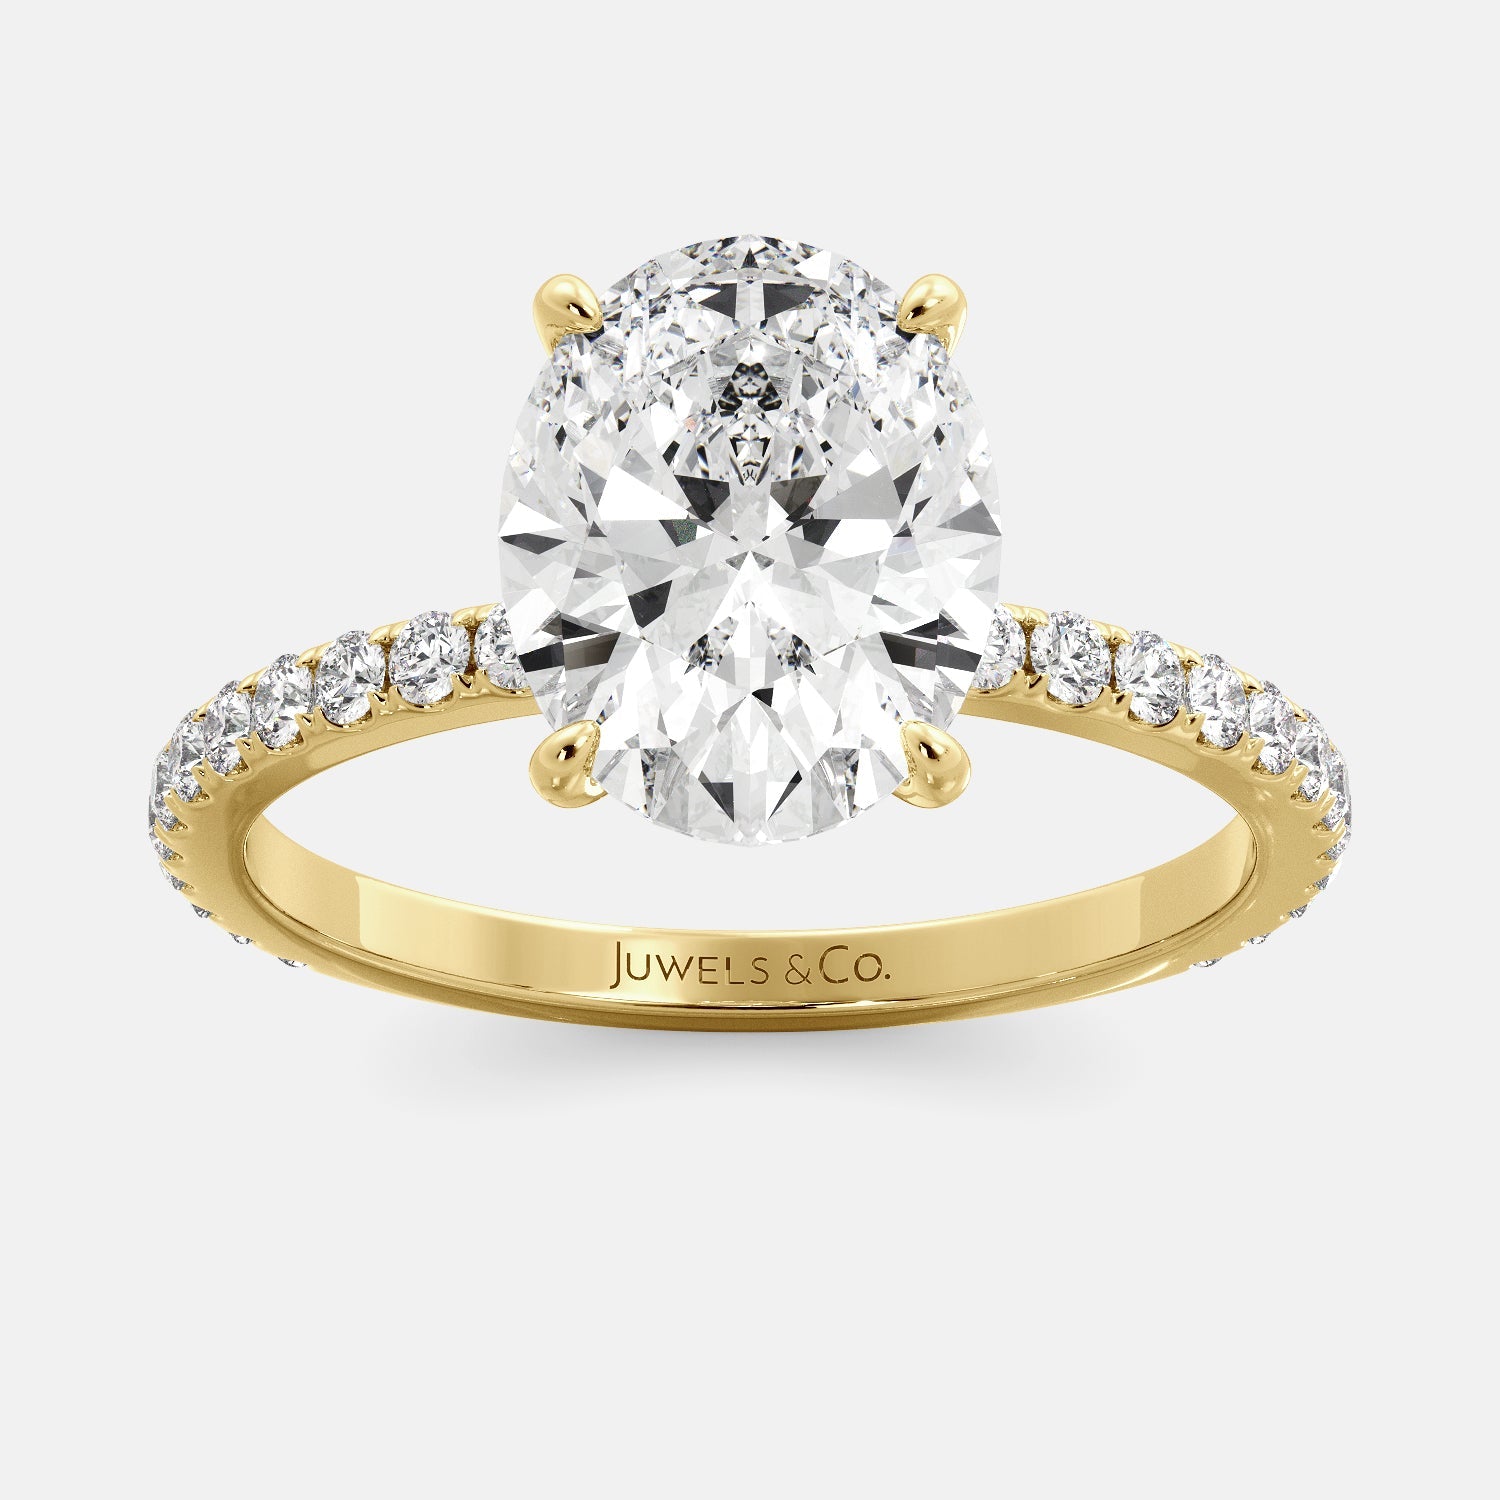 Lab-grown Oval Cut Diamond Ring with pave, 2 carat, yellow gold 14K